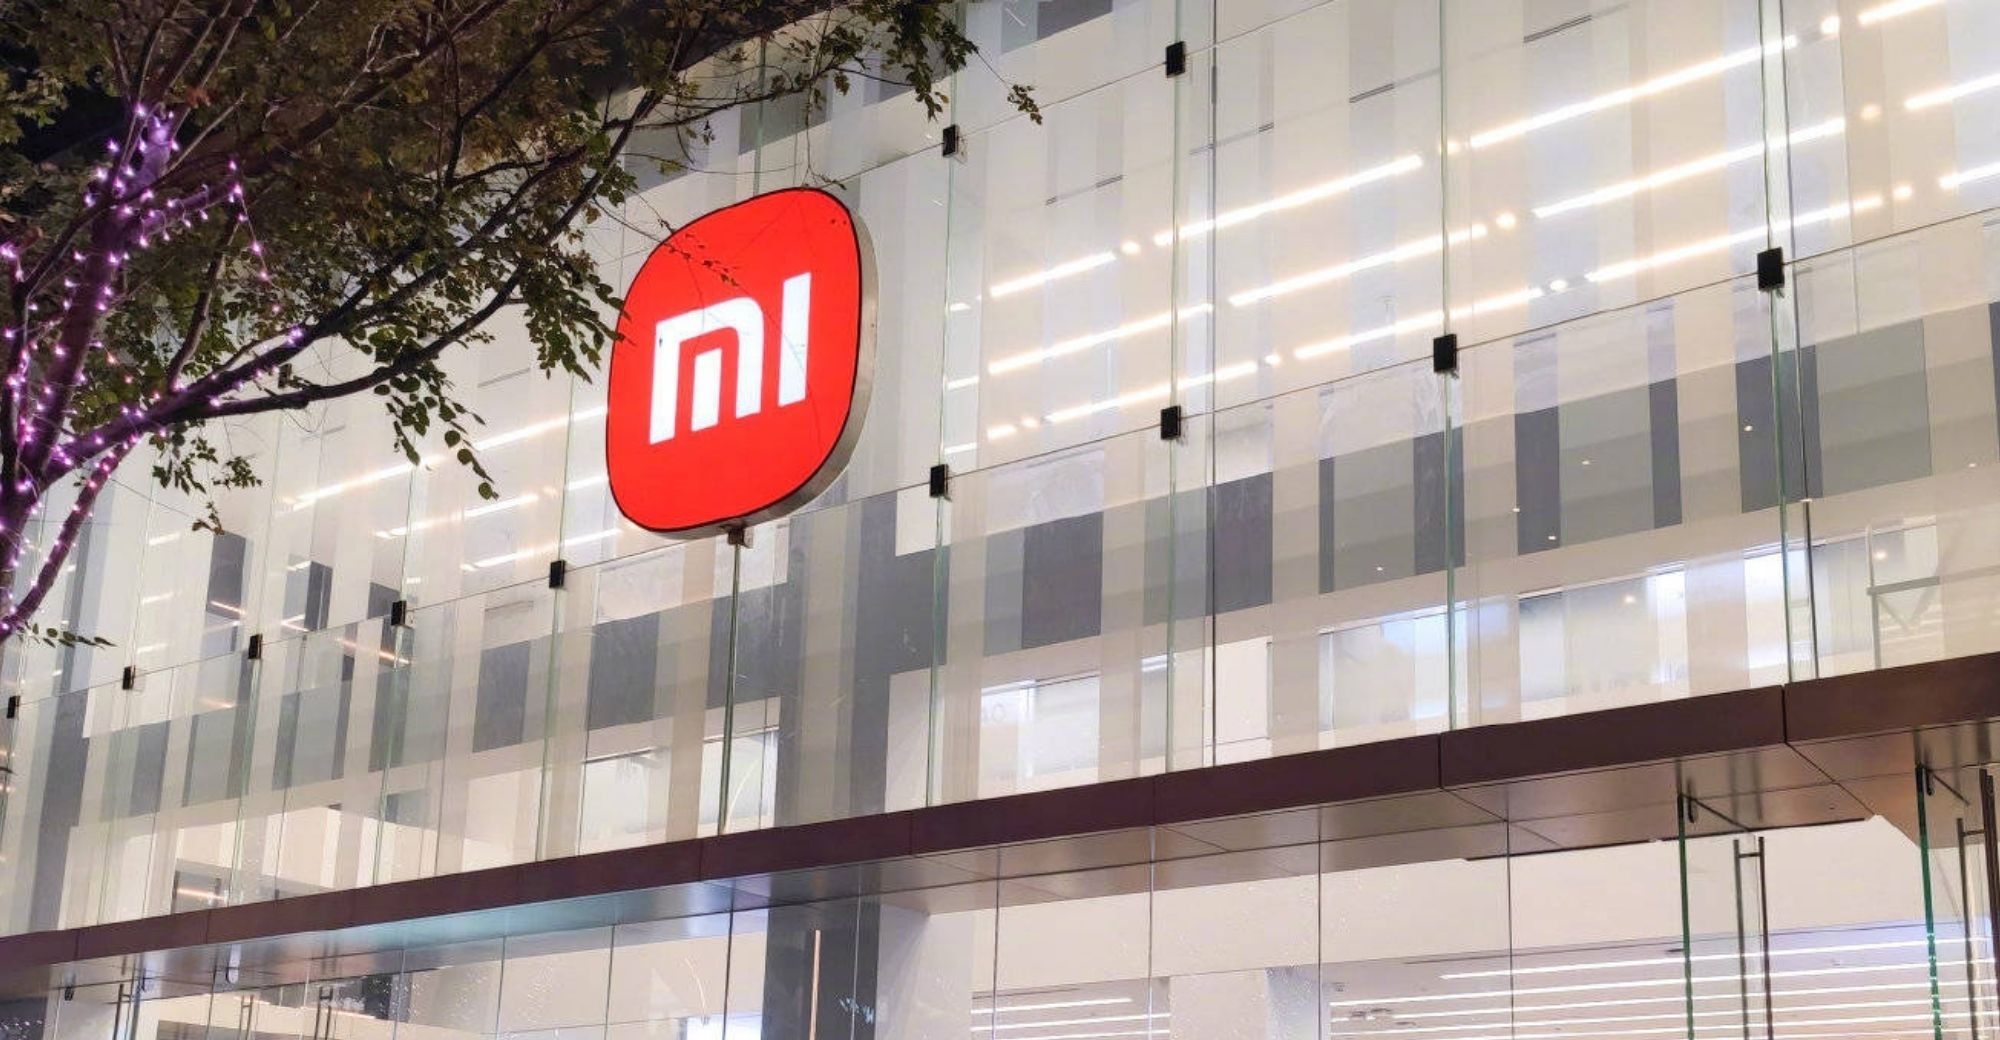 Xiaomi Opposes Being Listed As An “International War Sponsor” by Ukraine